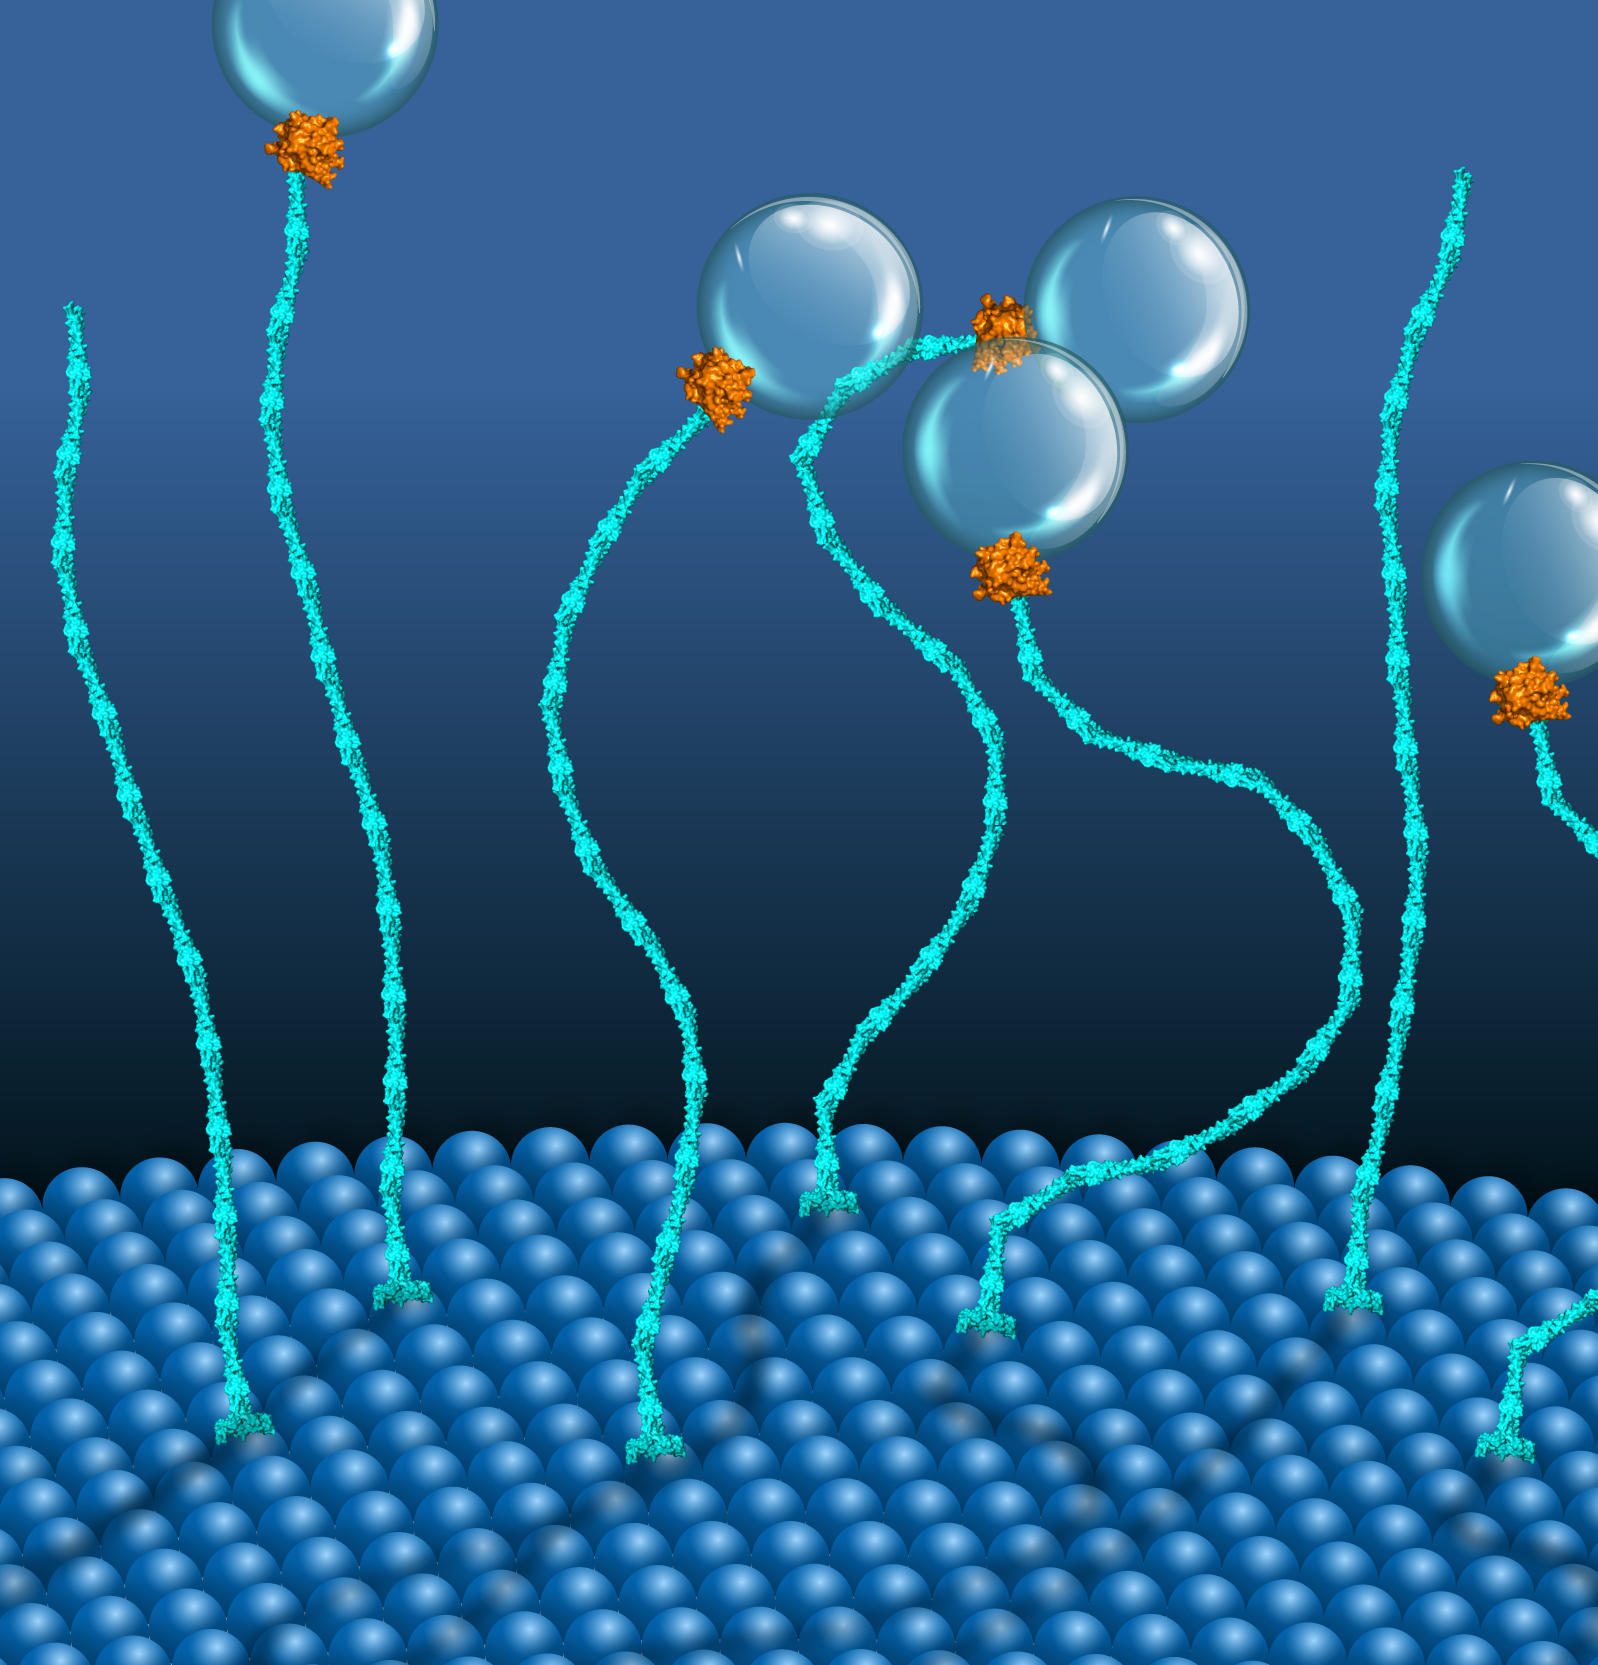 Scientists Discover a New Course of “Molecular Motors”